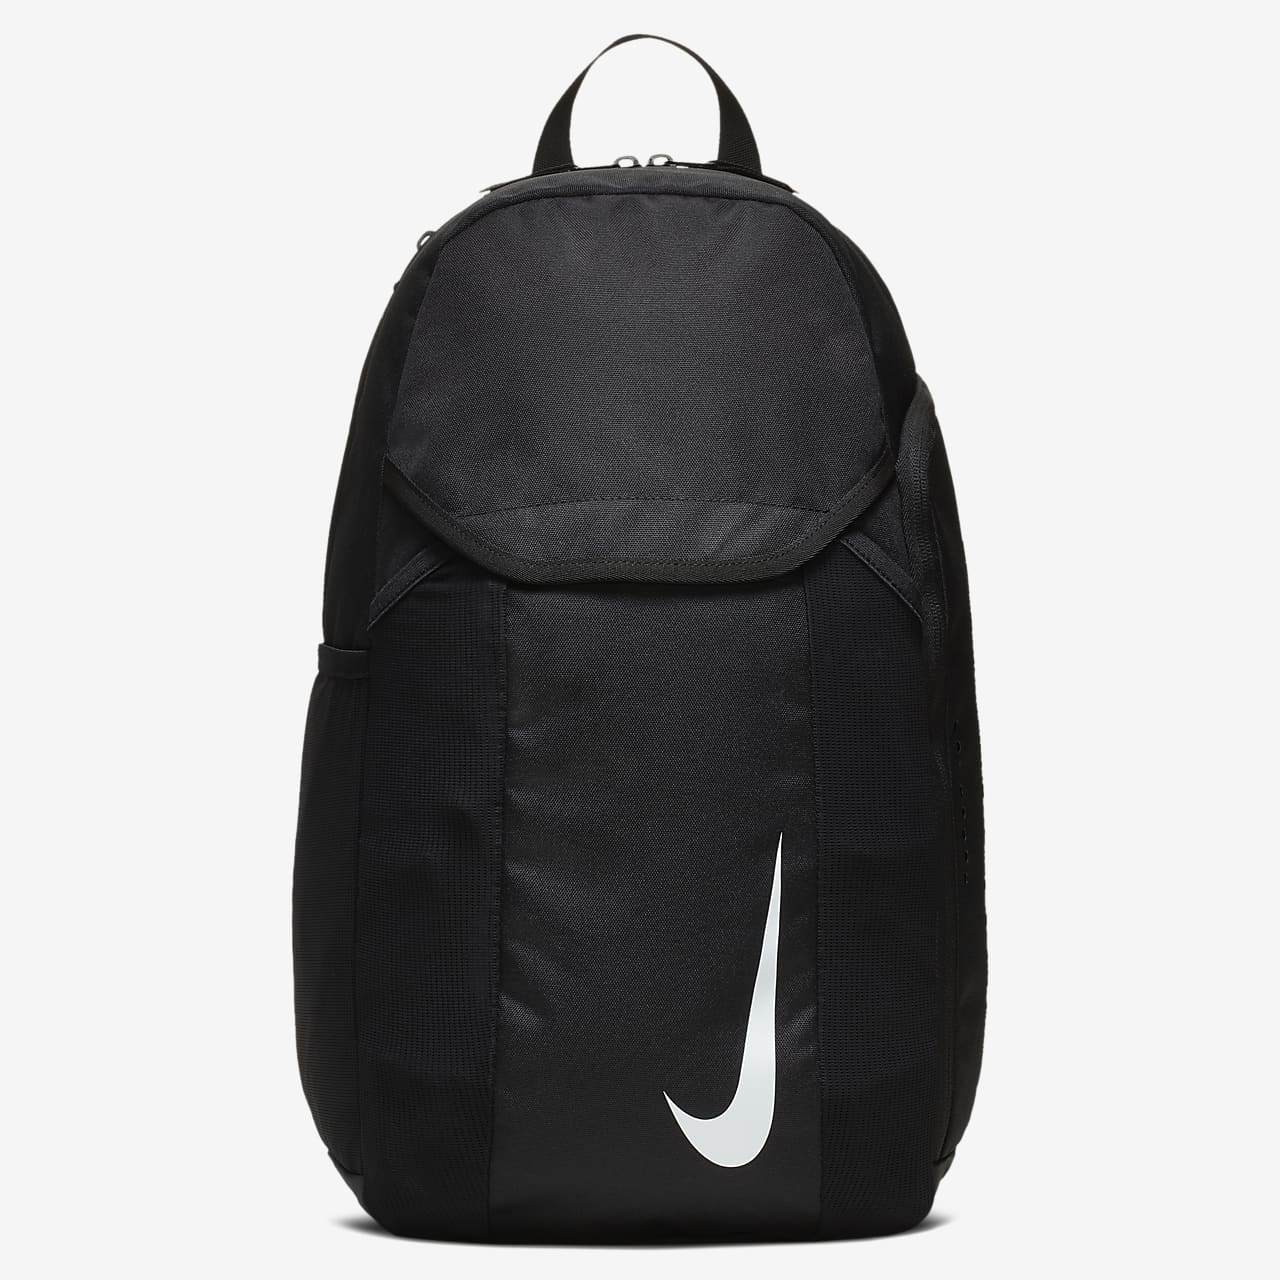 football rucksack with boot compartment